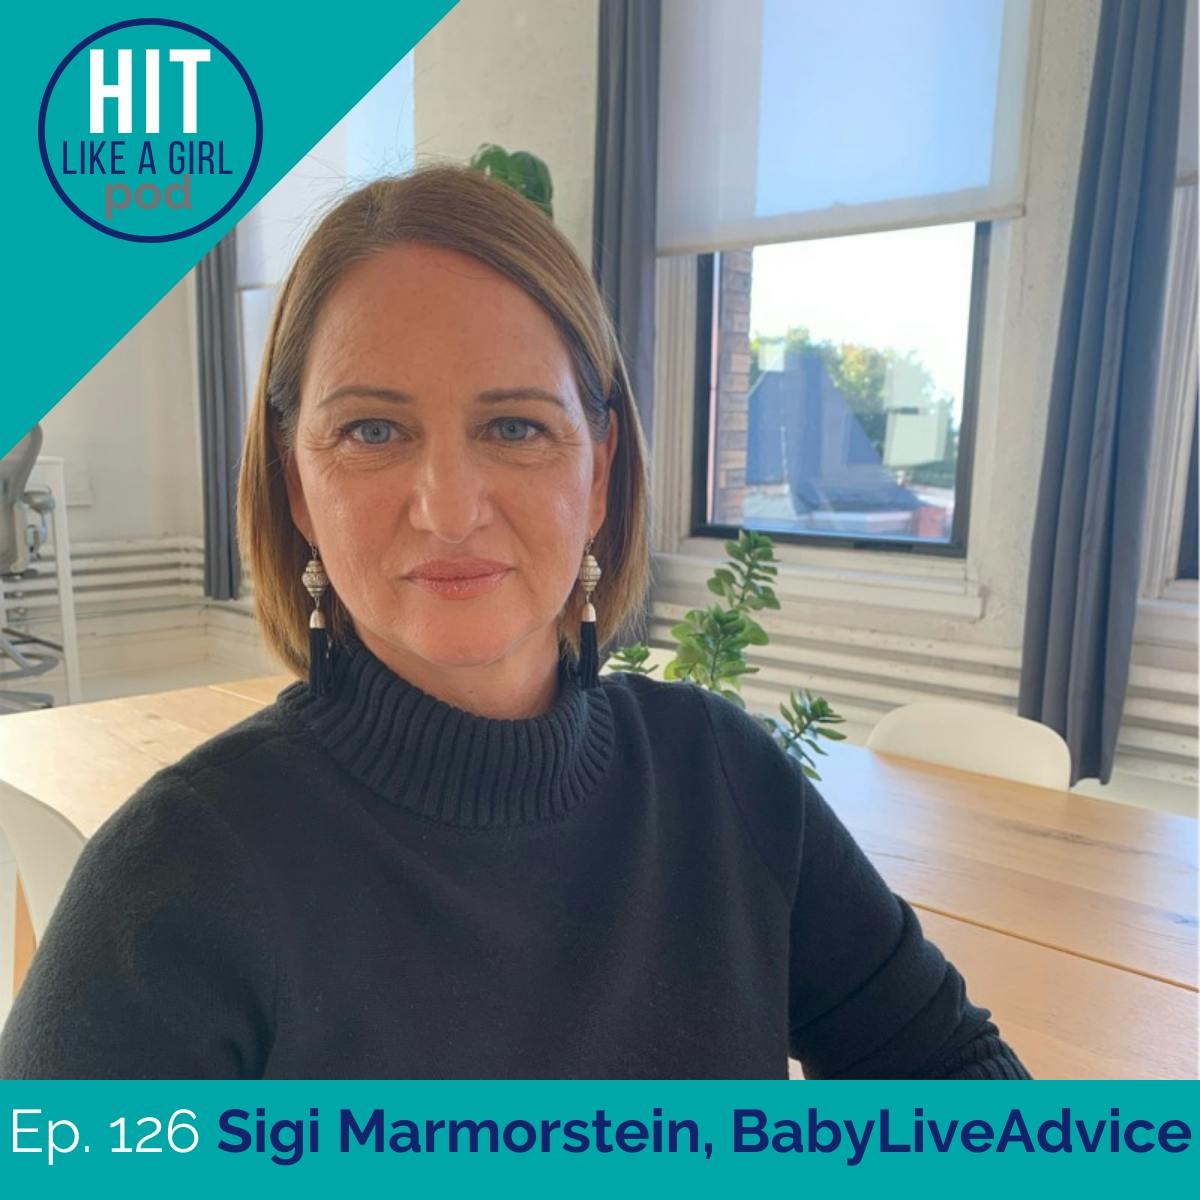 Sigi Marmorstein shares the shocking statistics related to having a baby in the U.S.